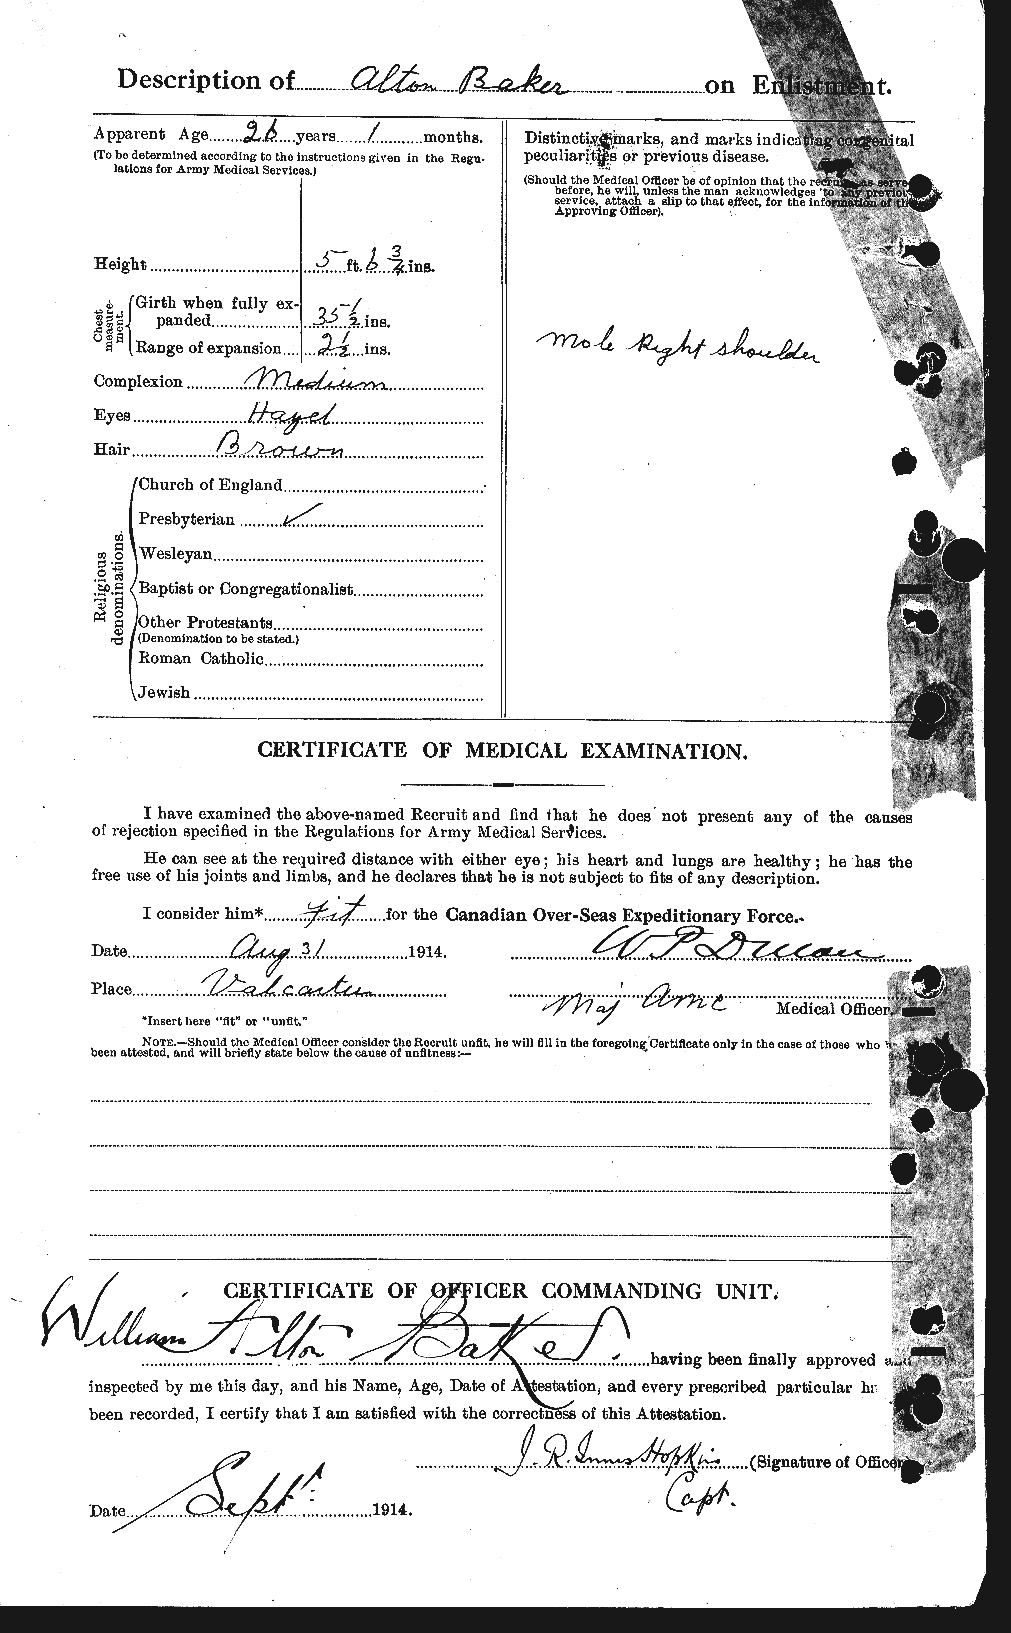 Personnel Records of the First World War - CEF 216541b